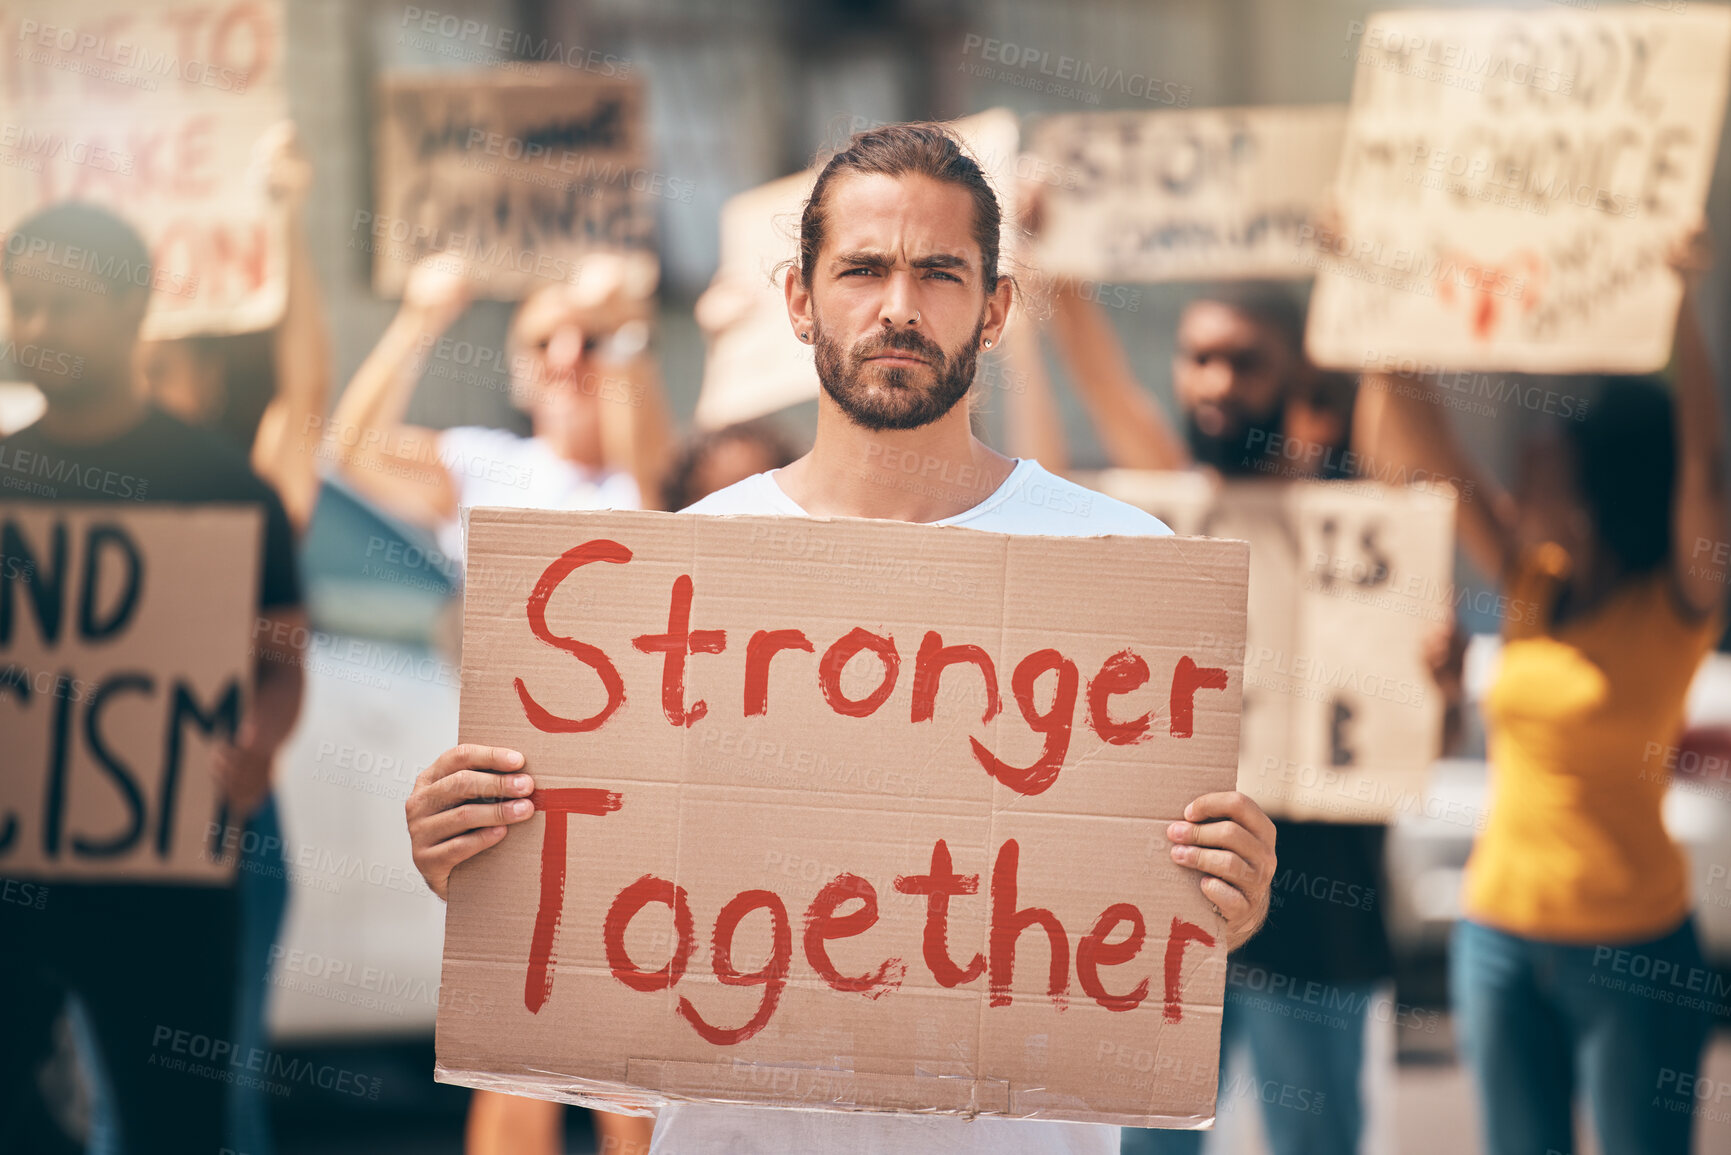 Buy stock photo Portrait, protest in street and group stand in solidarity, climate change and march together. Man, people and crowd support human rights, equality activism and blm movement for lgbtq, racism or earth